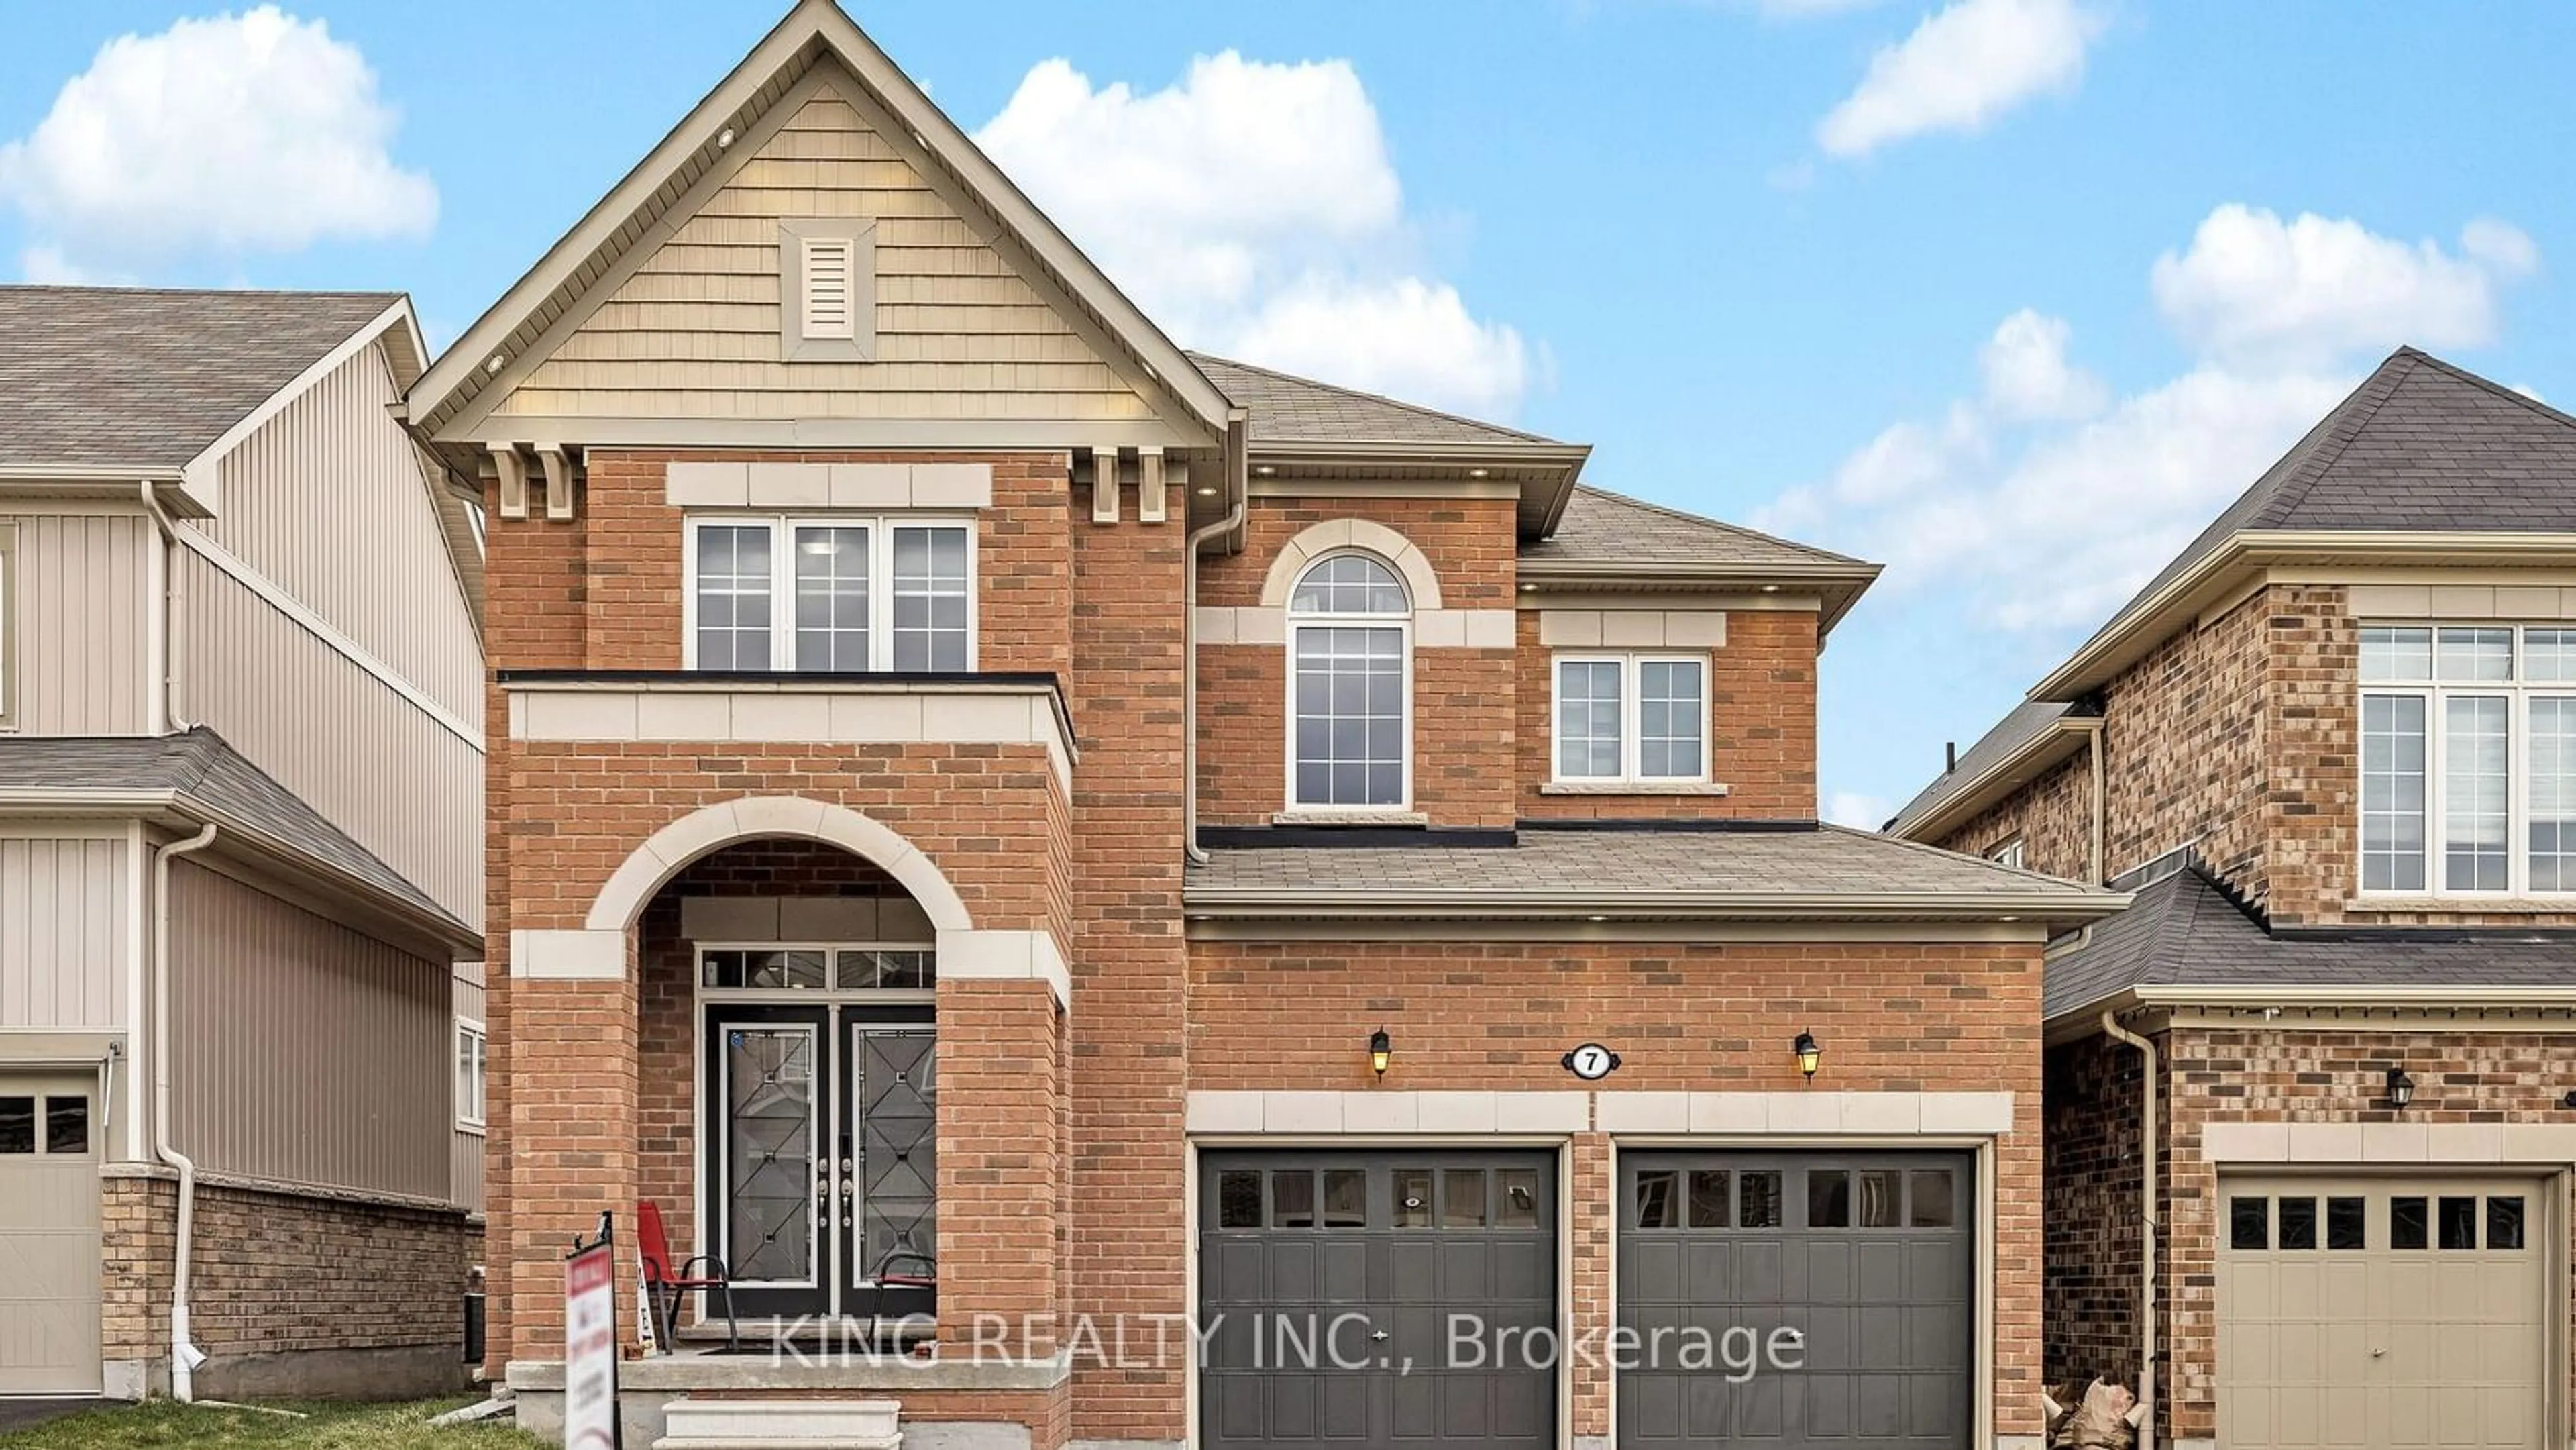 Home with brick exterior material for 7 Porter Dr, Orangeville Ontario L9W 6Z4